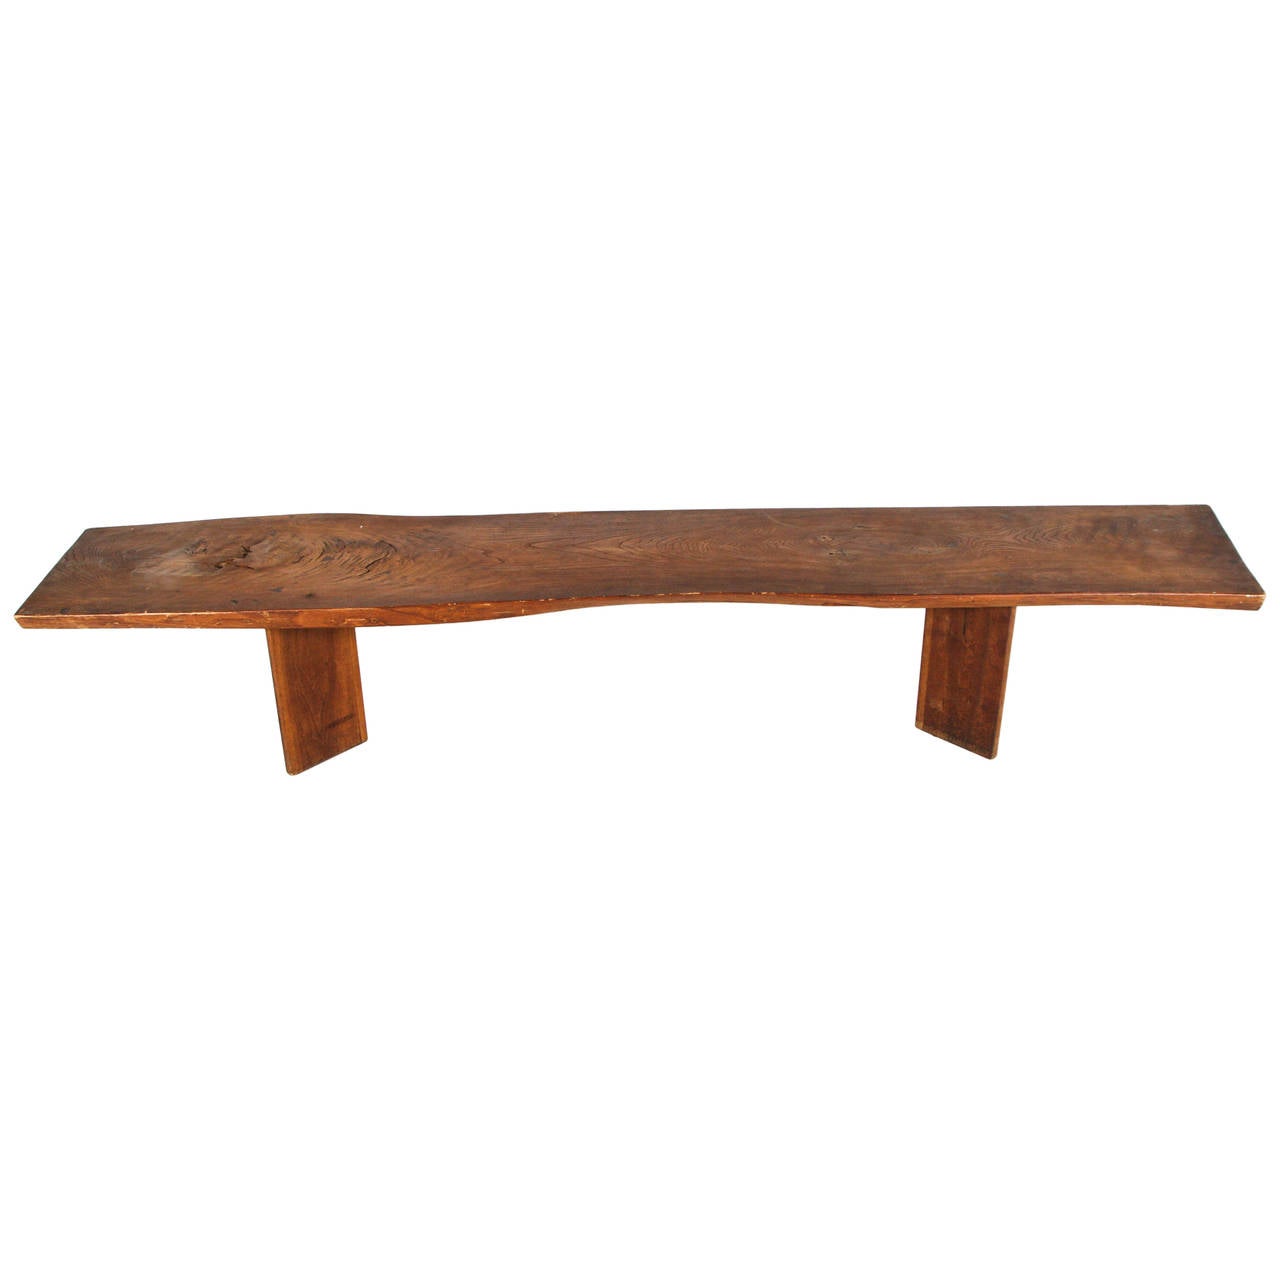 Handmade free form solid wood coffee table/bench in the style of Nakashima. Made in USA, circa 1960s.